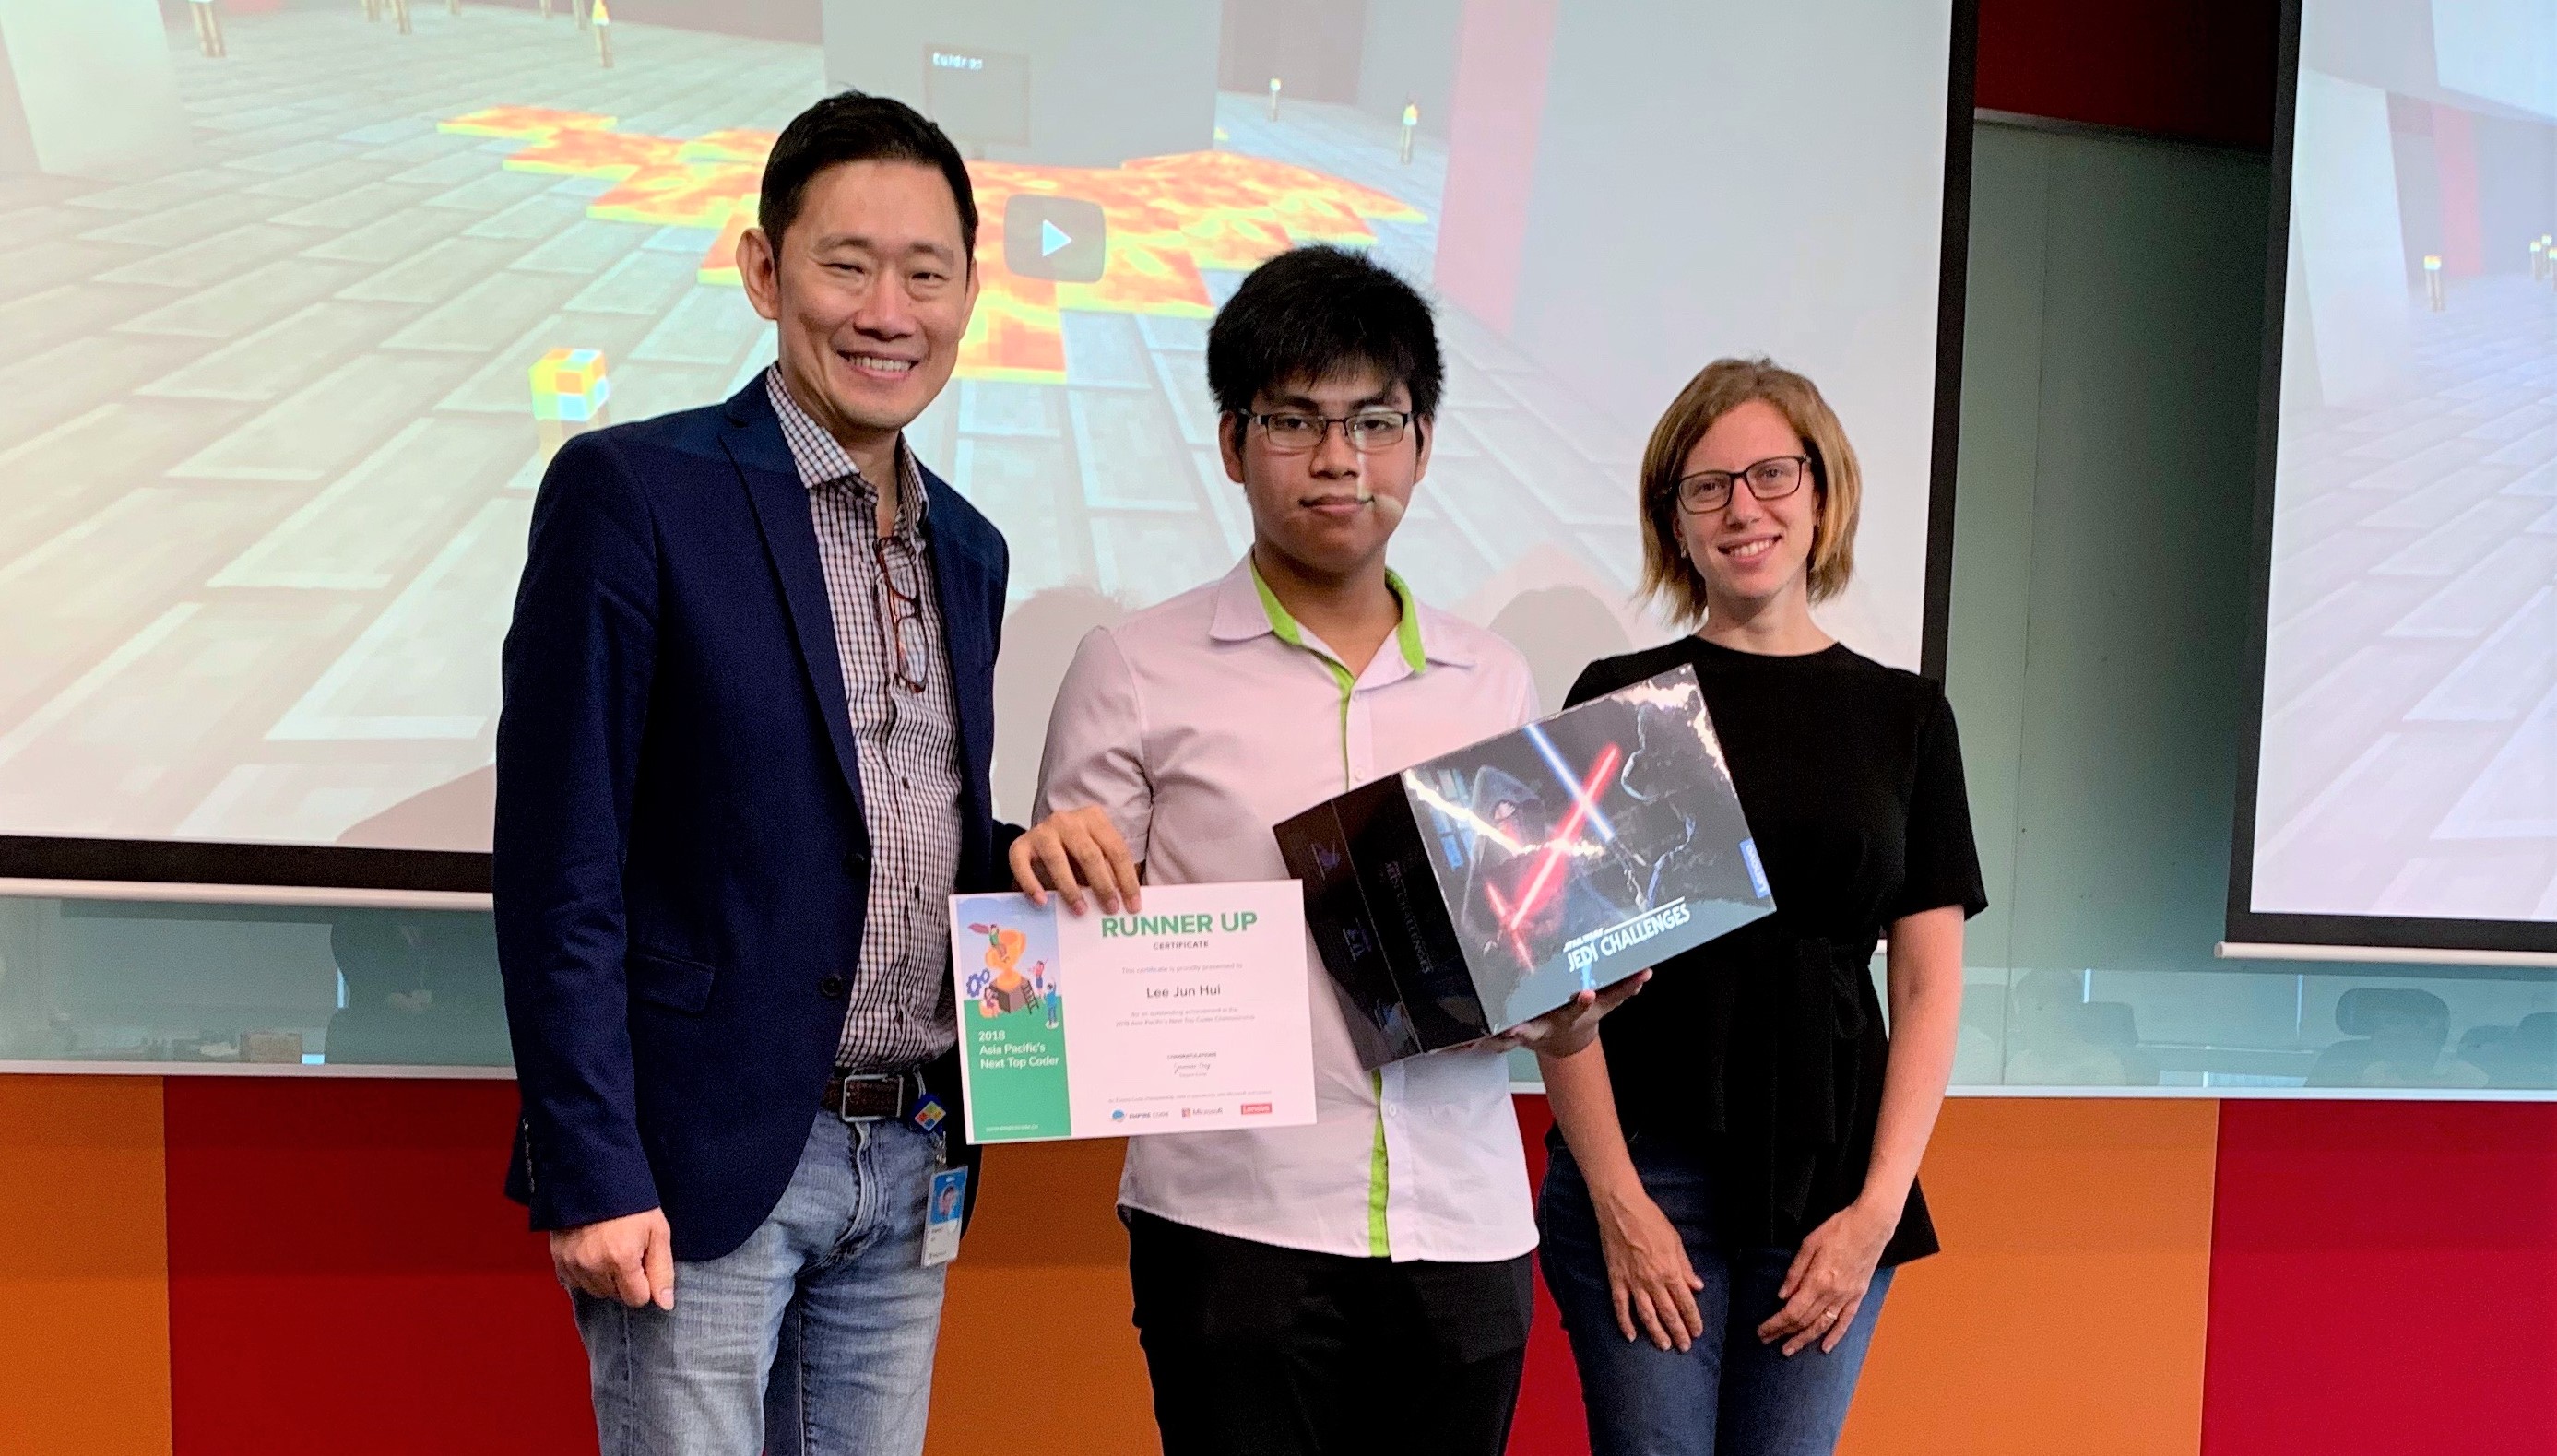 Kevin Wo, Managing Director, Microsoft Singapore (left) presenting the first runner-up prize to Singapore student, Lee Jun Hui (centre) for the Asia Pacific’s Next Top Coder competition, alongside Dr. Daiana Beitler, Philanthropies Director, Microsoft Asia